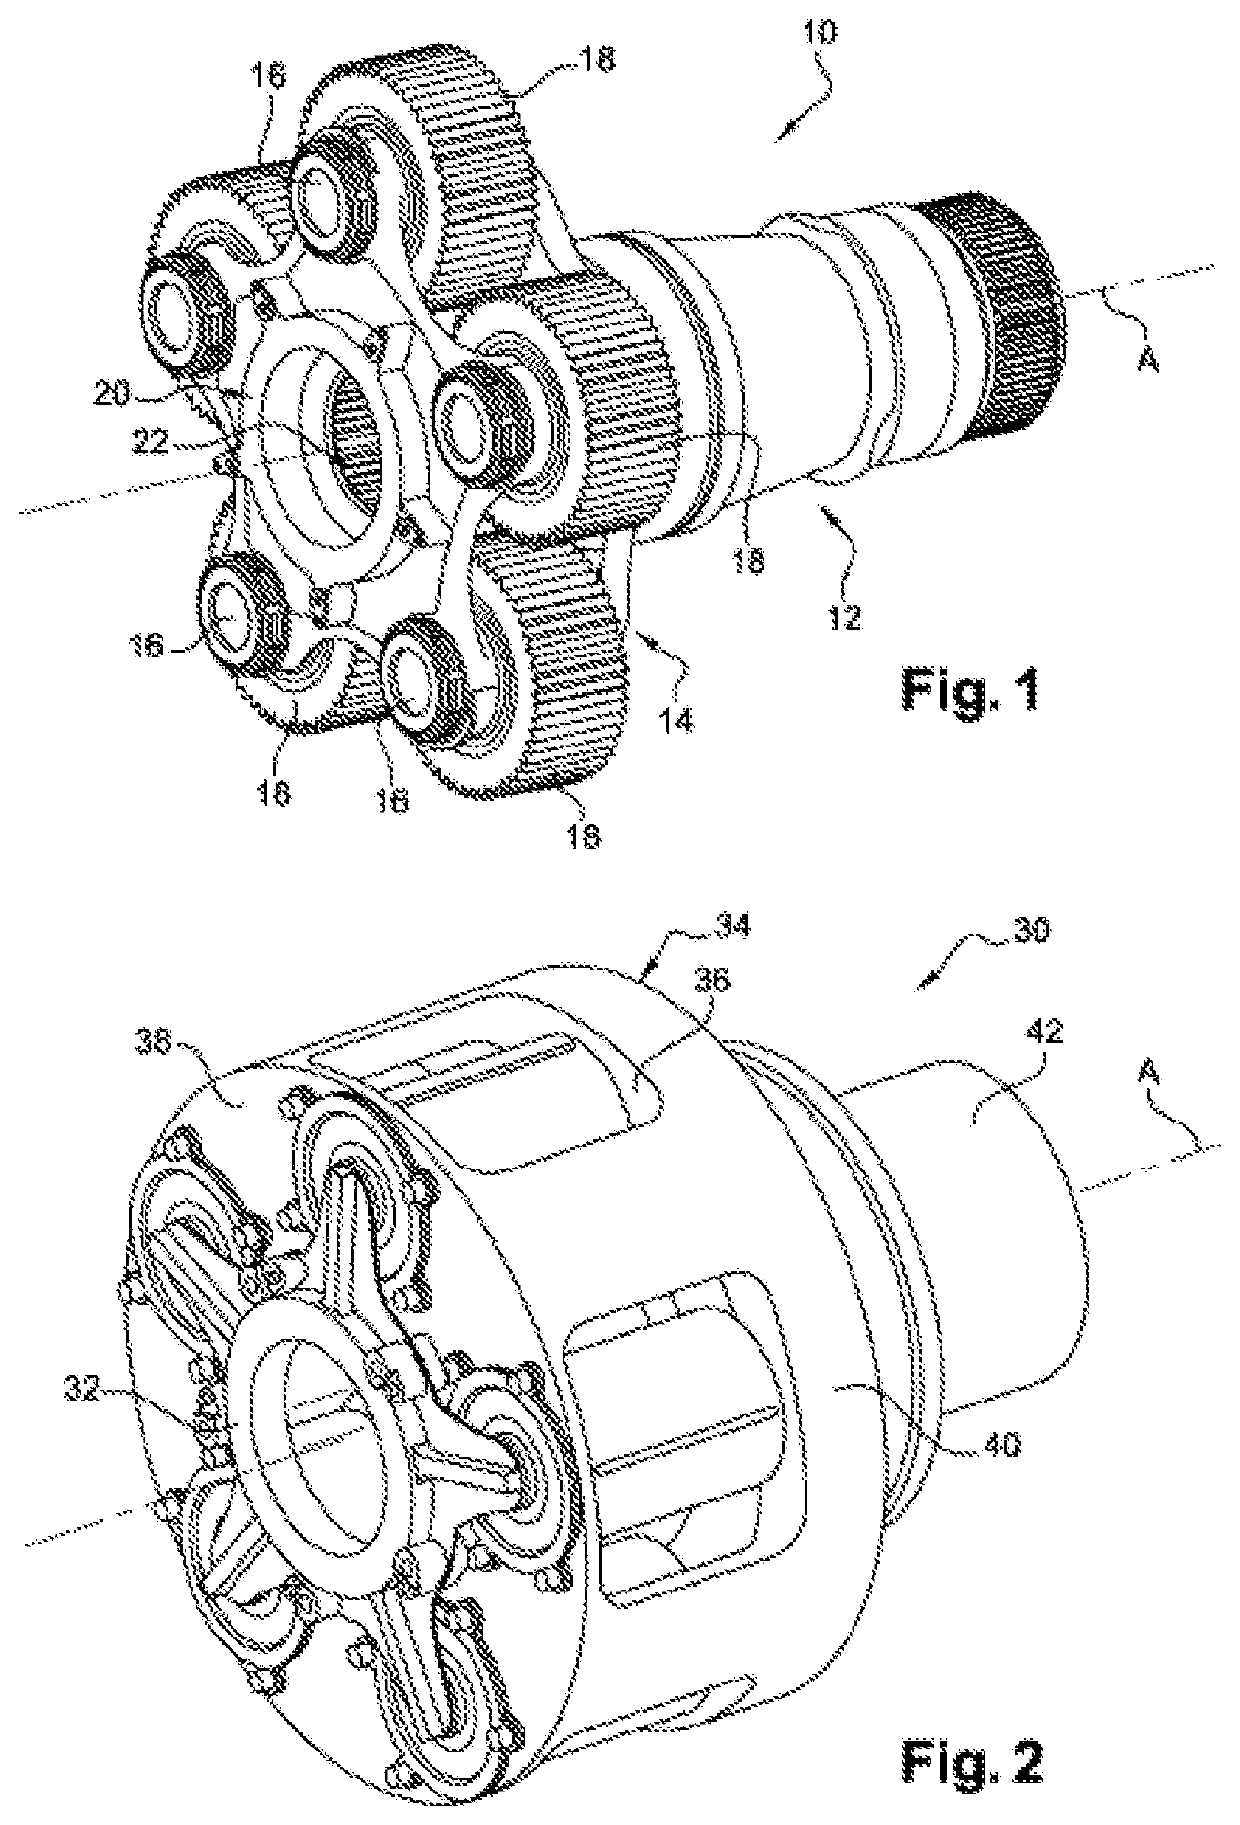 Cage planet carrier for a speed-reducing unit with an epicyclic gear train